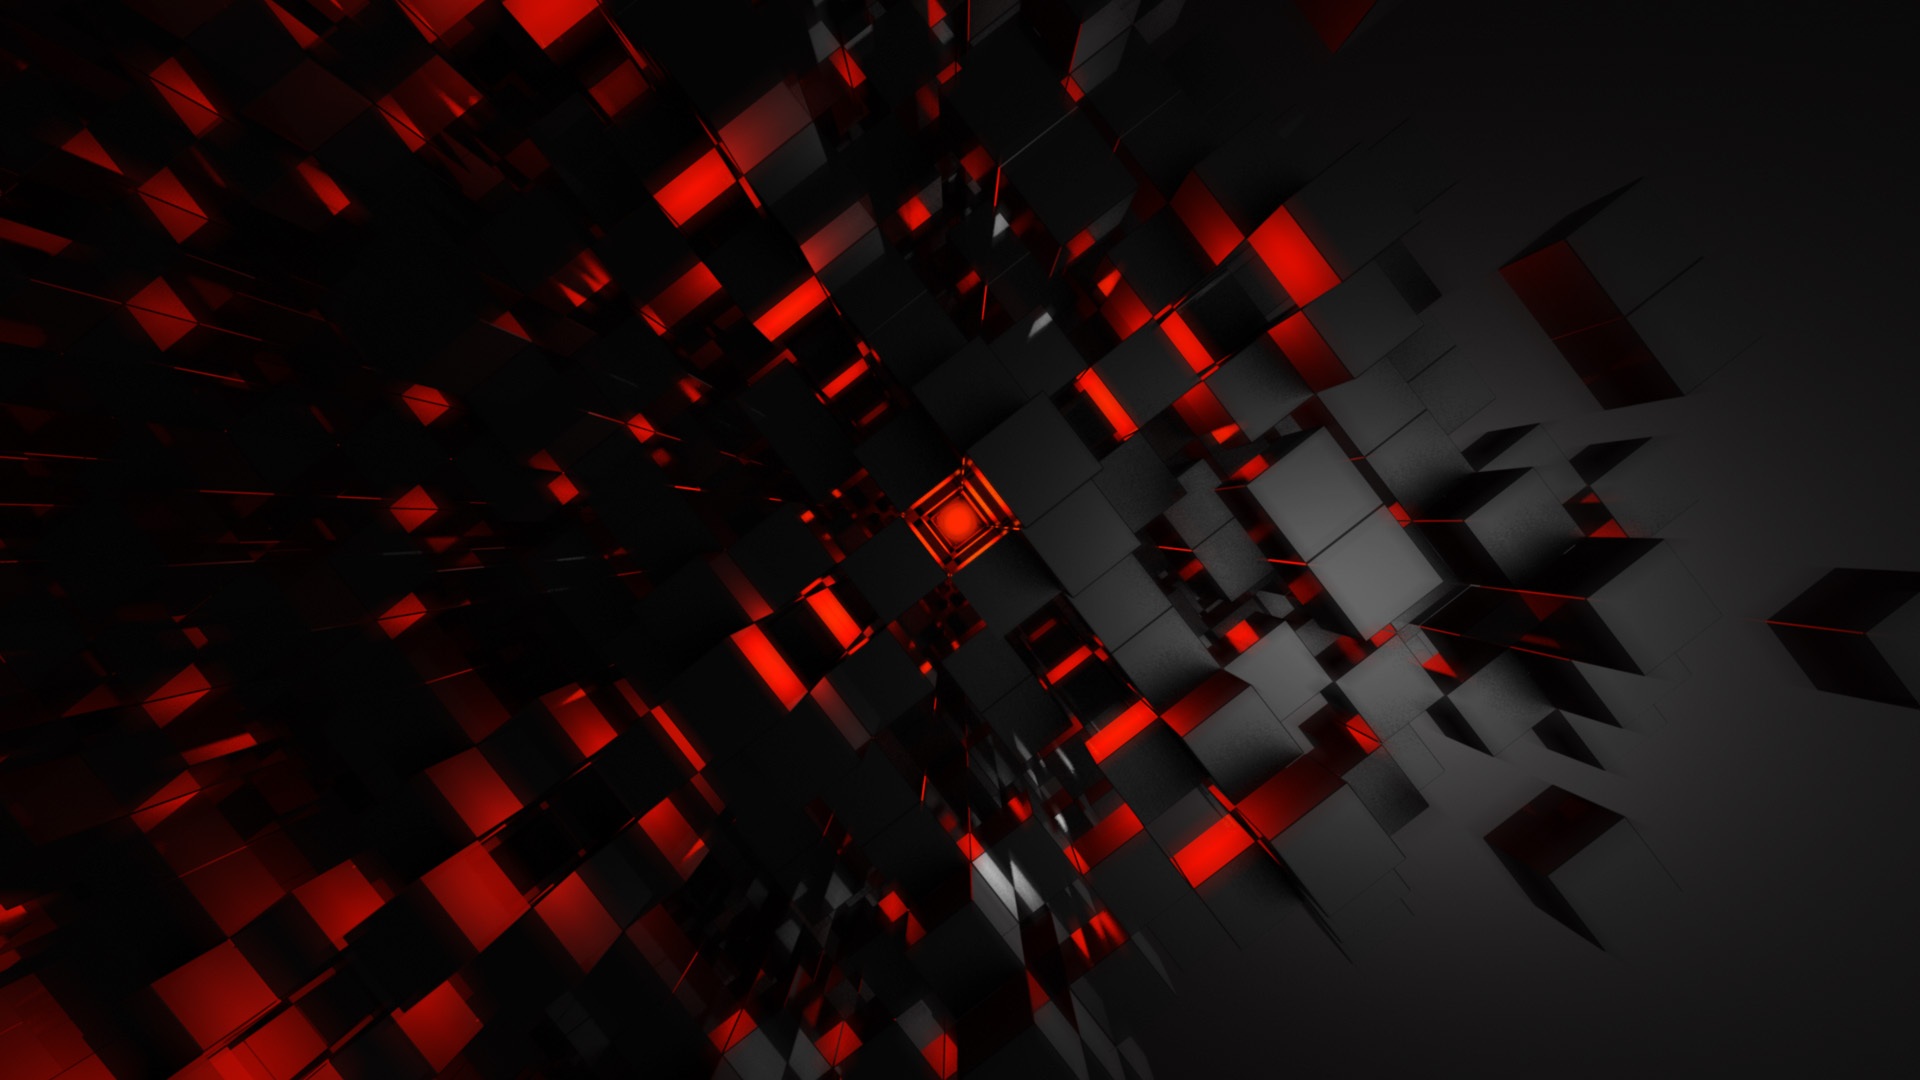 Black and Red Abstract Desktop Pics Wallpapers 1314   HD